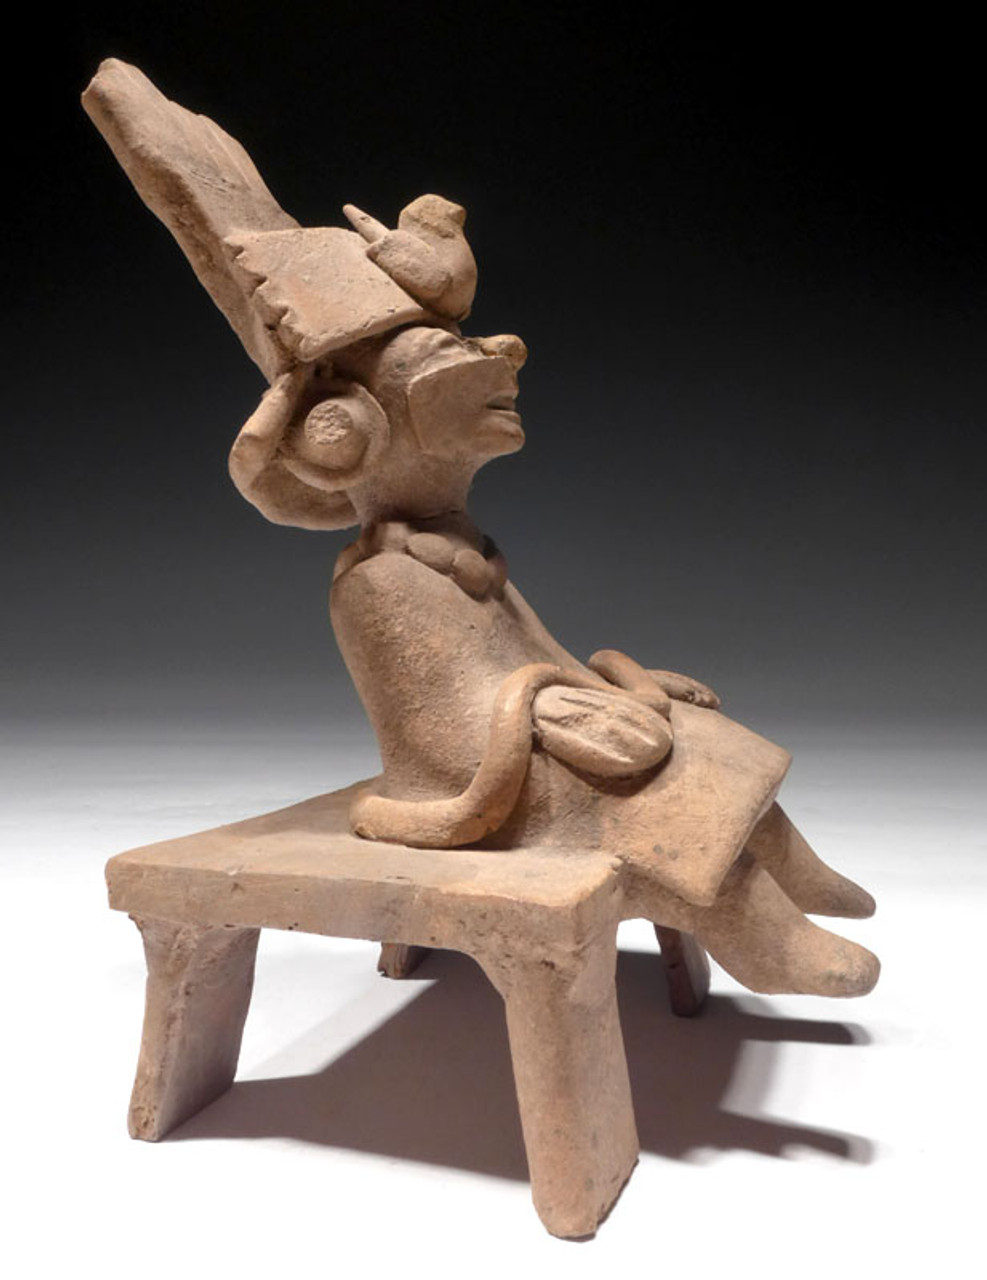 PCX005 - EERIE CERAMIC TLAZOTEOTL AZTEC PRE-COLUMBIAN GODDESS OF SIN, EXCESS AND FORGIVENESS